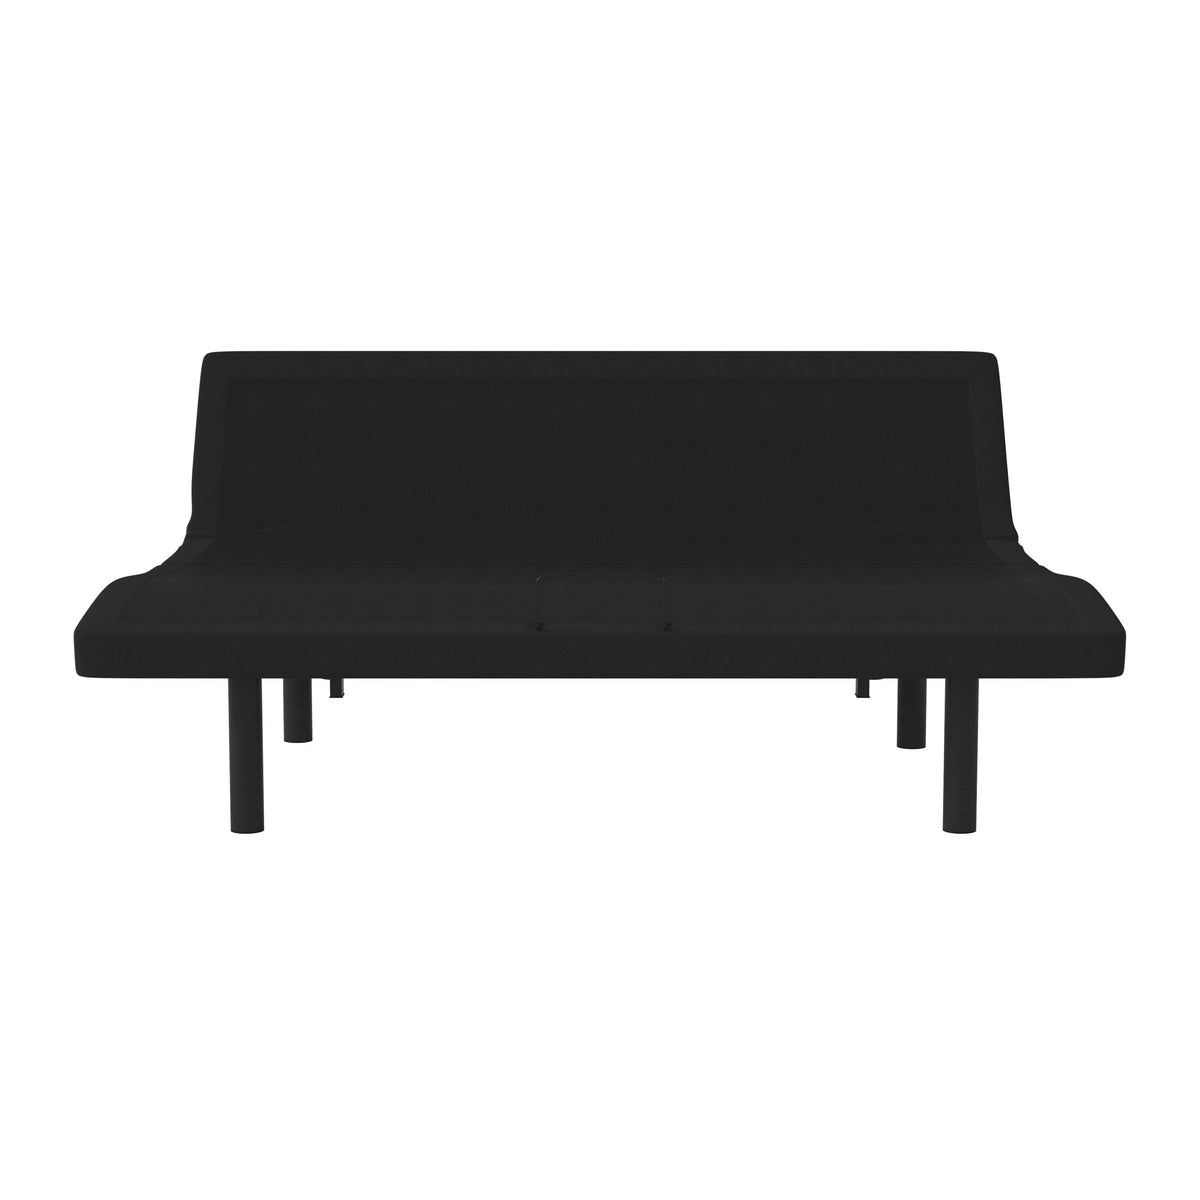 King |#| Anti-skid Black Upholstered Adjustable Bed Base with Wireless Remote-King